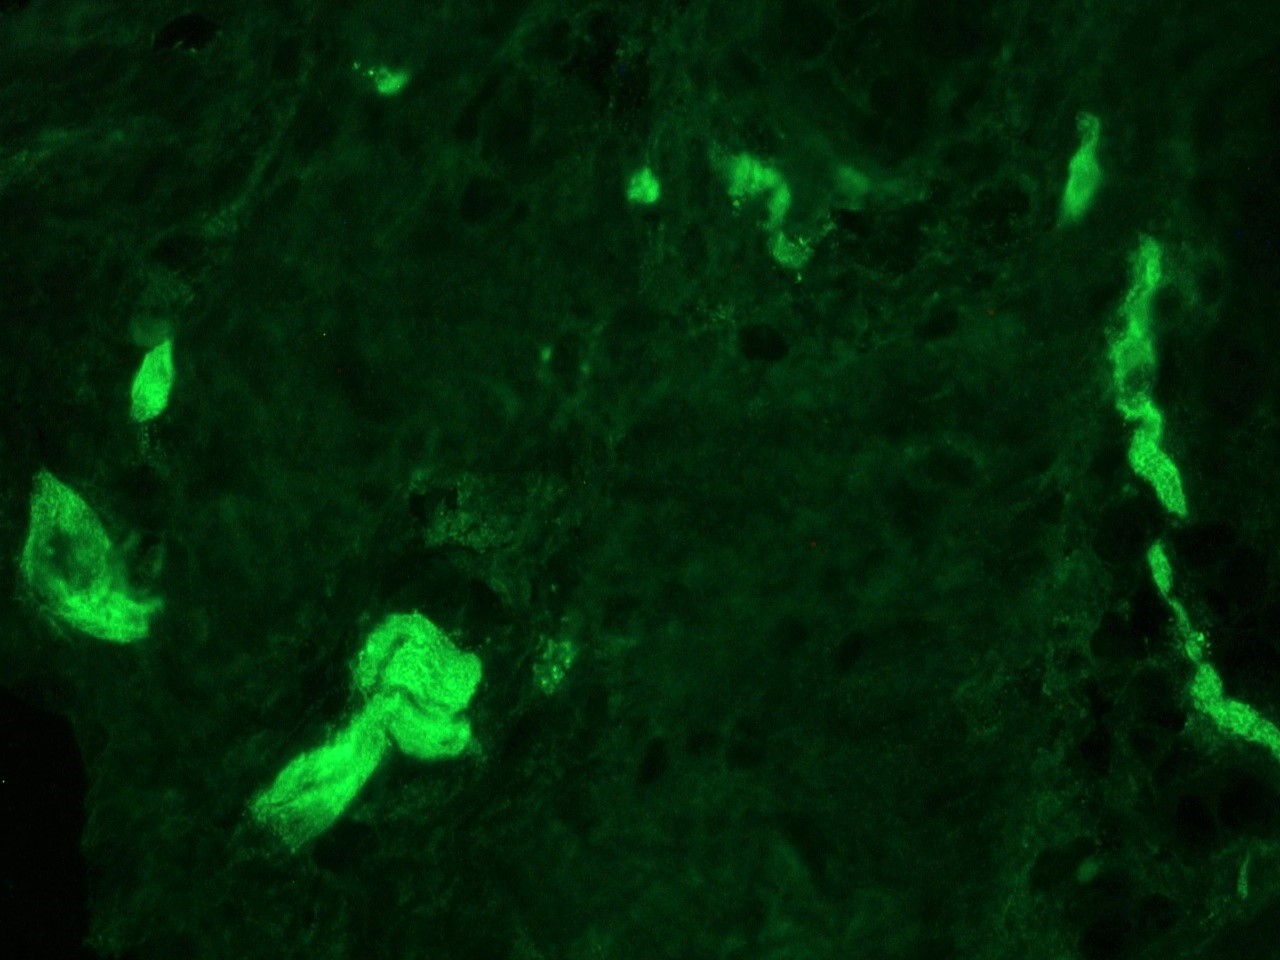 Figure 4. Indirect immunofluorescence staining of swine colon frozen tissue sections with 0566P (diluted 1:500), showing the specific pattern of NCAM/CD56 in the nerves innervating the tissue (parasympathetic ganglion cells in both Auerbach's and Meissner's plexuses). As expected, no reactivity is seen in the epithelial cell compartment, muscle or connective tissue.